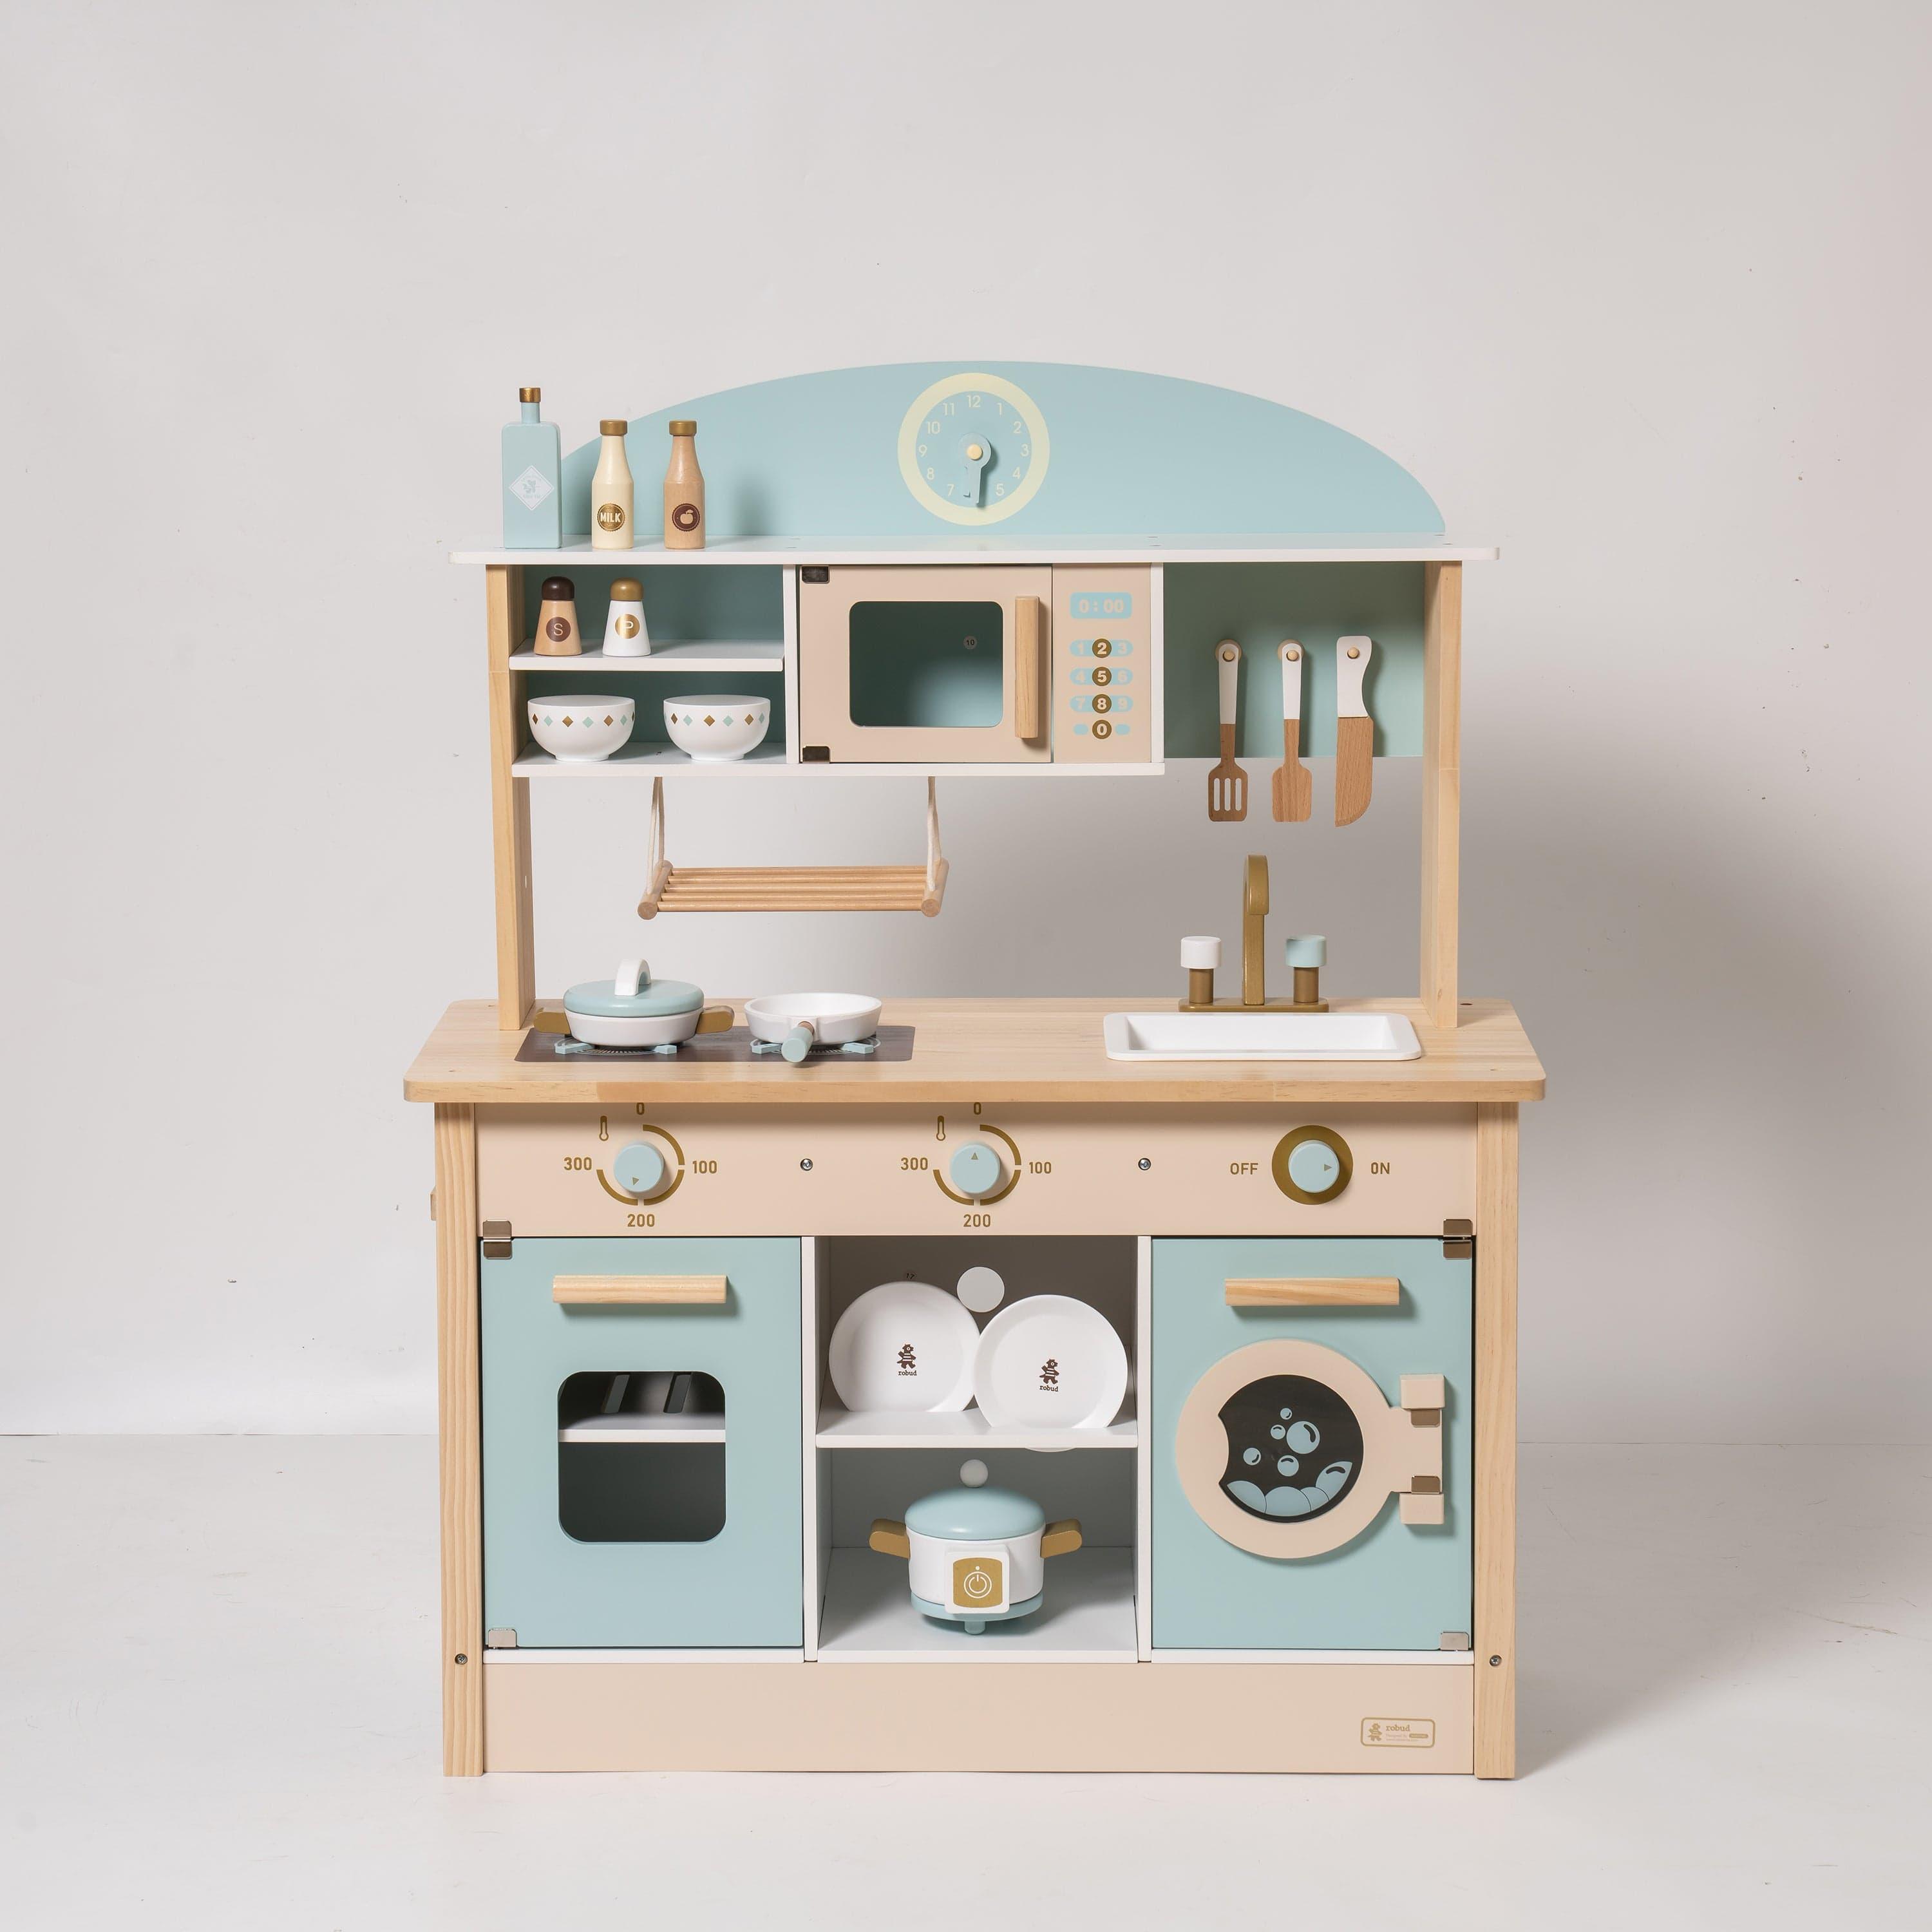 Shop Modern Style Toy Kitchen Set for Boys& Girls 3+, Great Gift for Christmas, Party, Birthday(Blue & Gold) Mademoiselle Home Decor